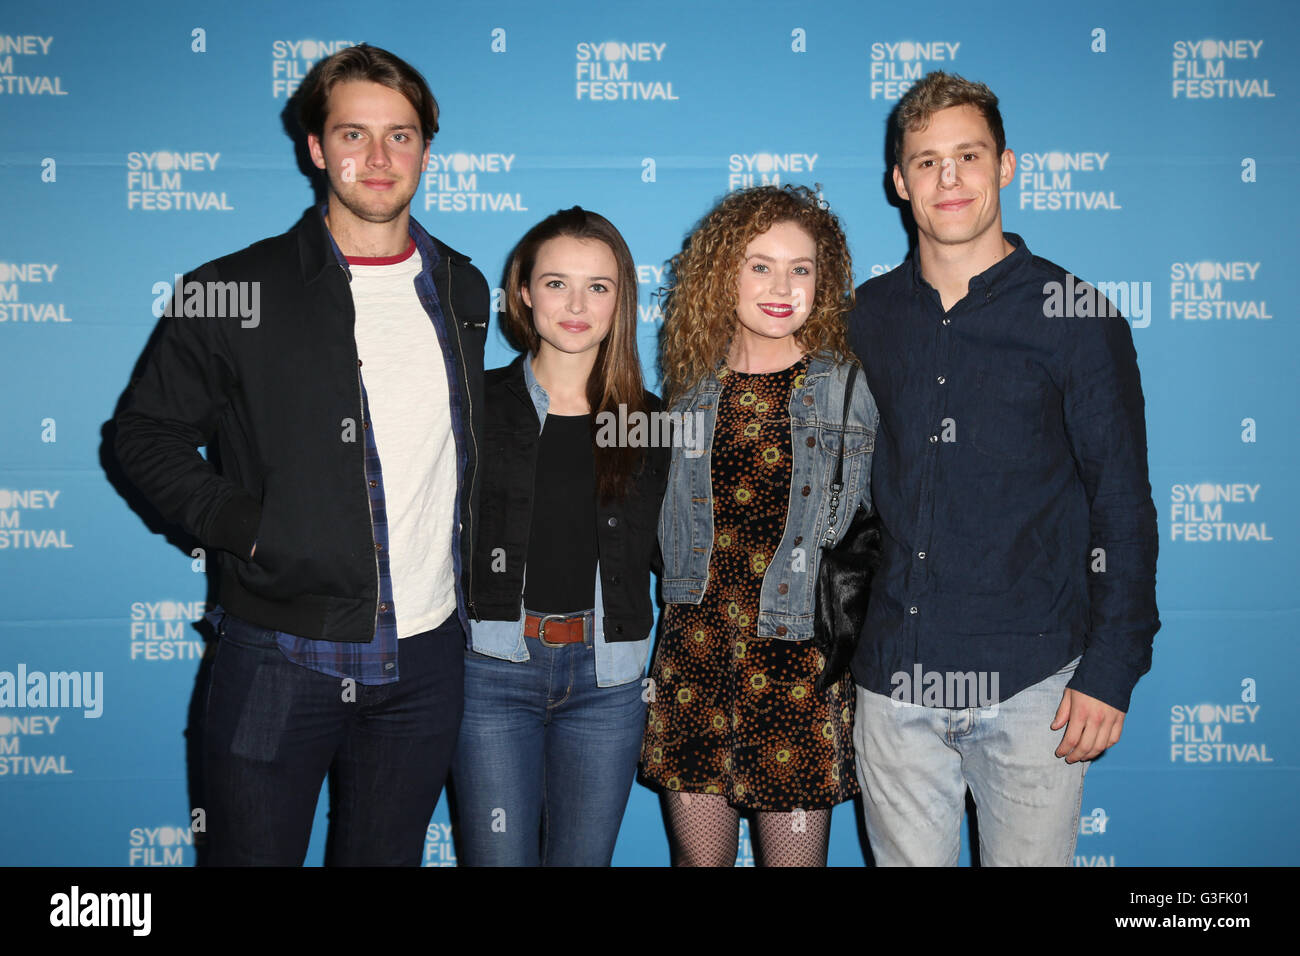 Sydney, Australia. 11 June 2016. As part of the Sydney Film Festival, celebrities arrived on the red carpet for the world premiere of Teenage Kicks at Event Cinemas, George Street. Pictured, L-R: Isaac Brown (actor – Home & Away), Philippa Northeast (actress – Home & Away), Gracie Gilbert (actress – Love Child) and Scott Lee (actor – Home & Away). Credit:  Richard Milnes/Alamy Live News Stock Photo